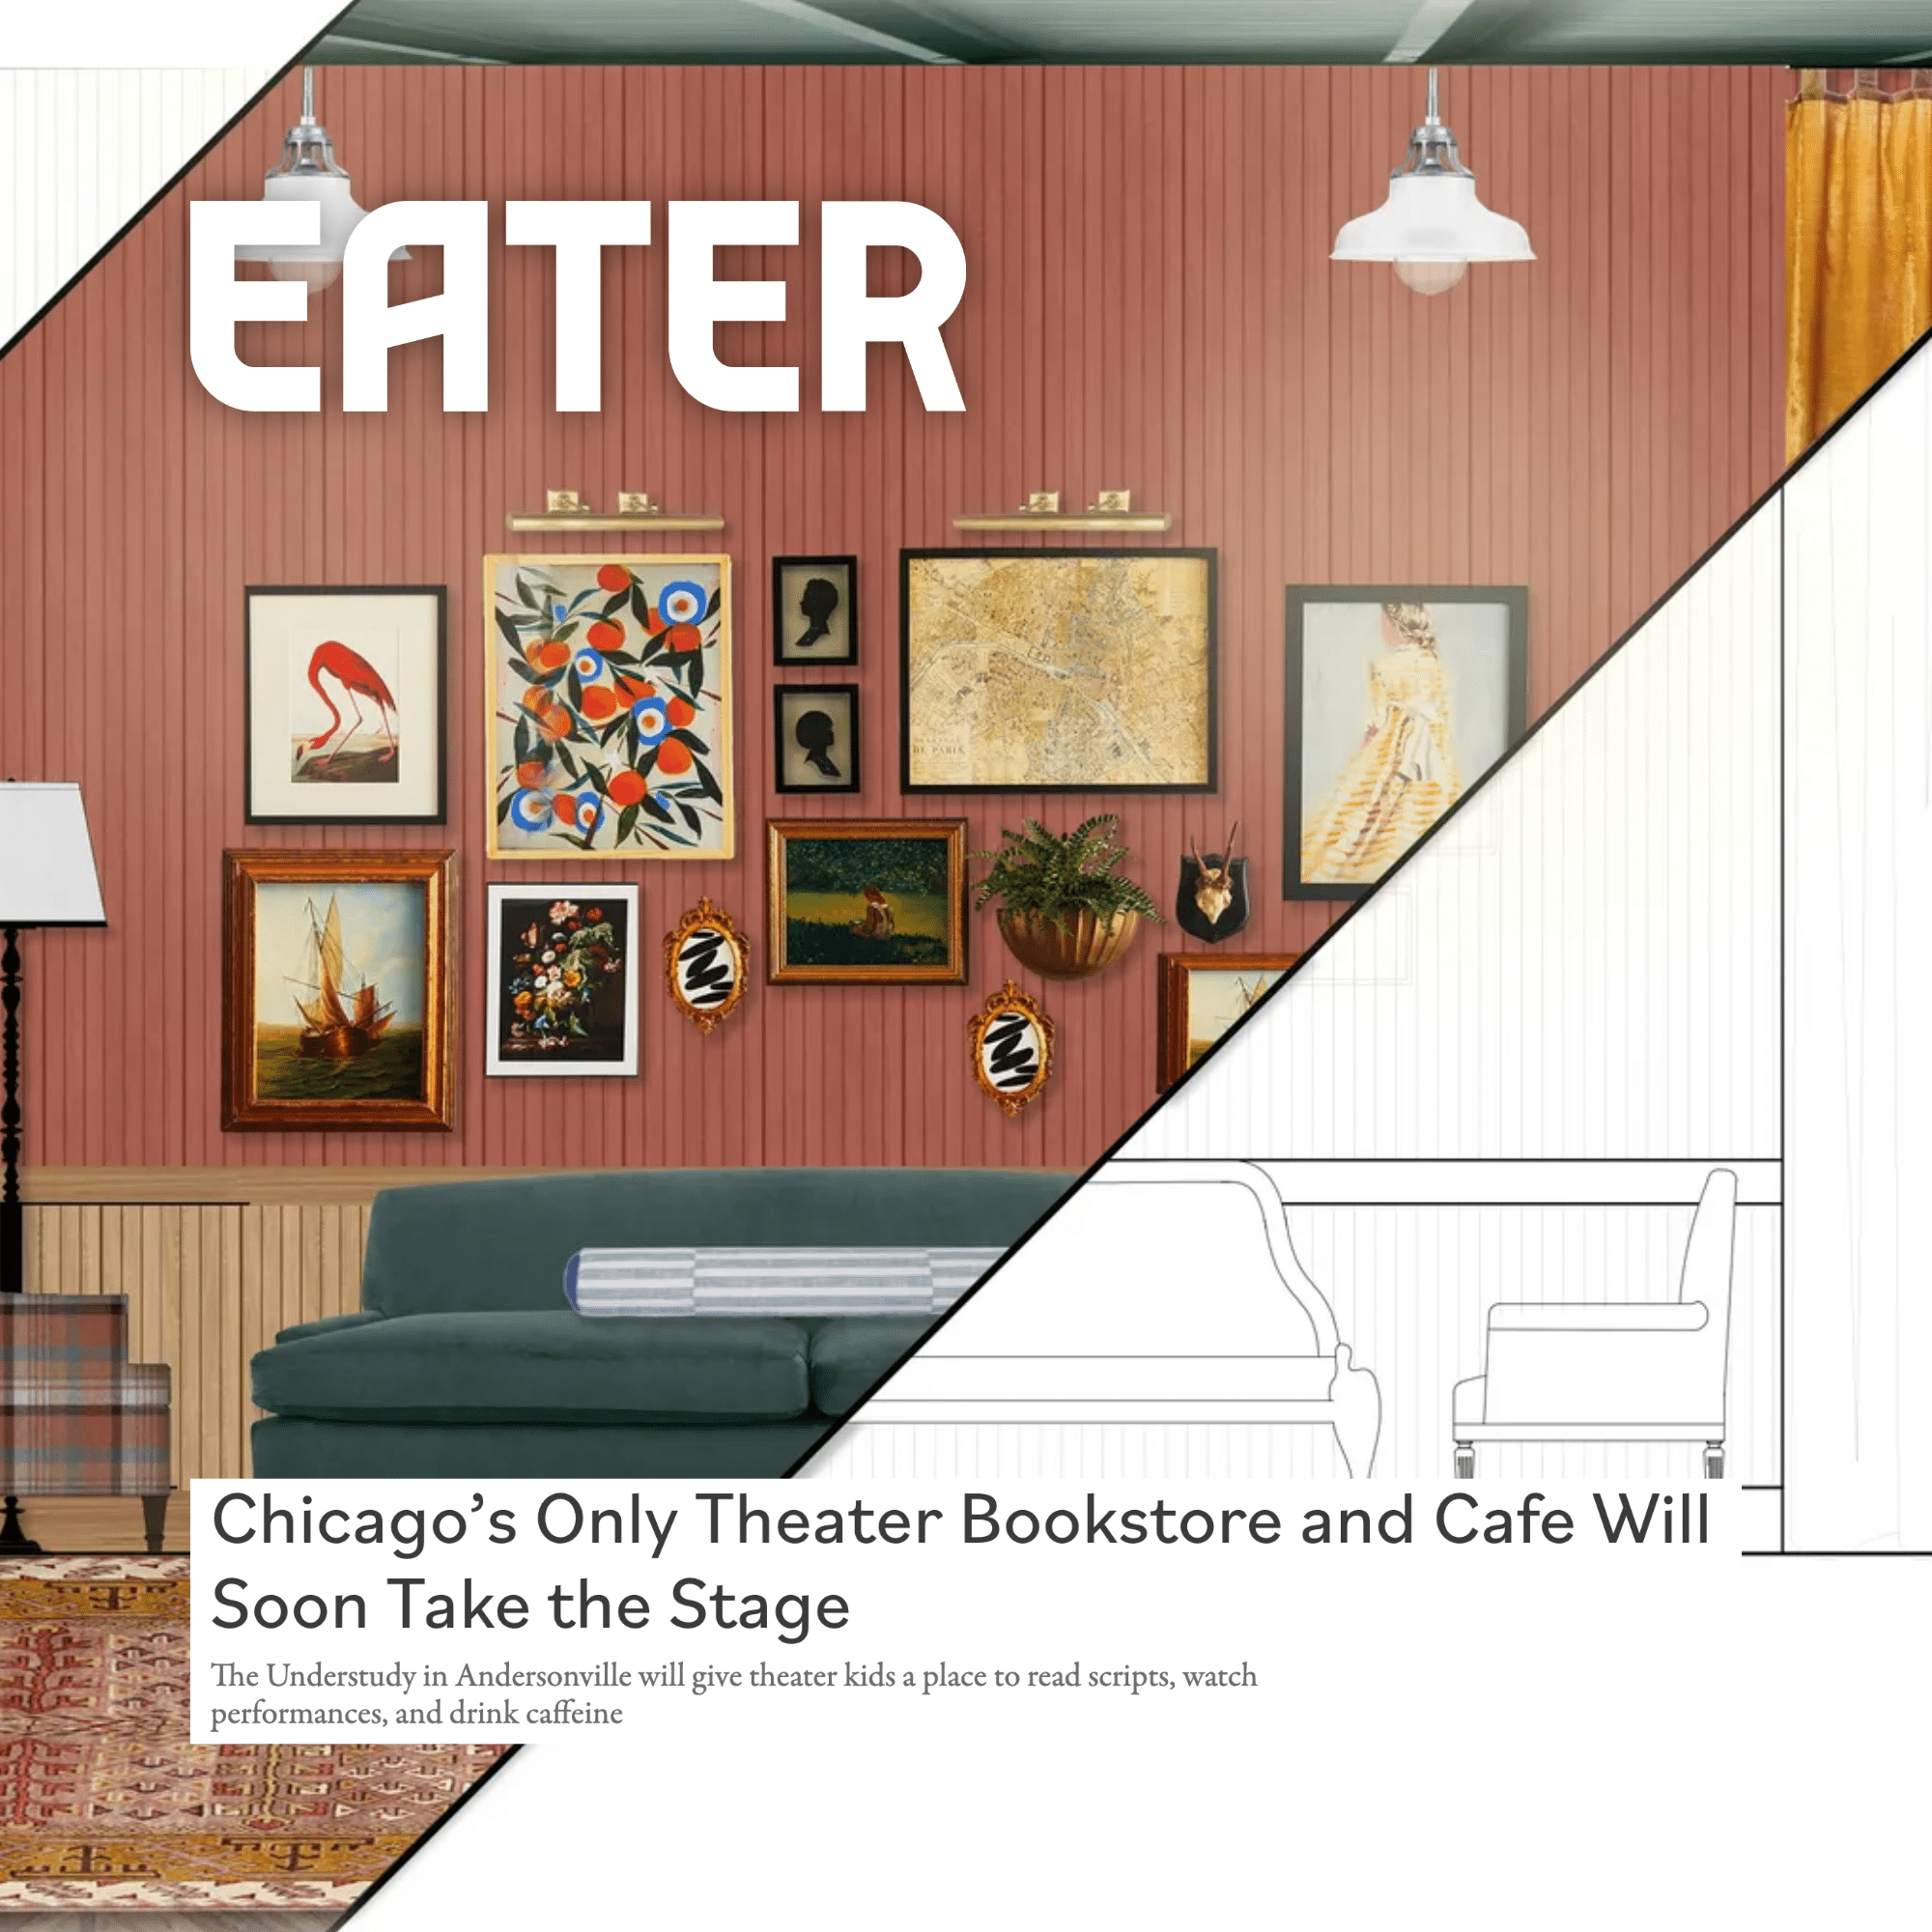 Chicago’s Only Theater Bookstore and Cafe Will Soon Take the Stage